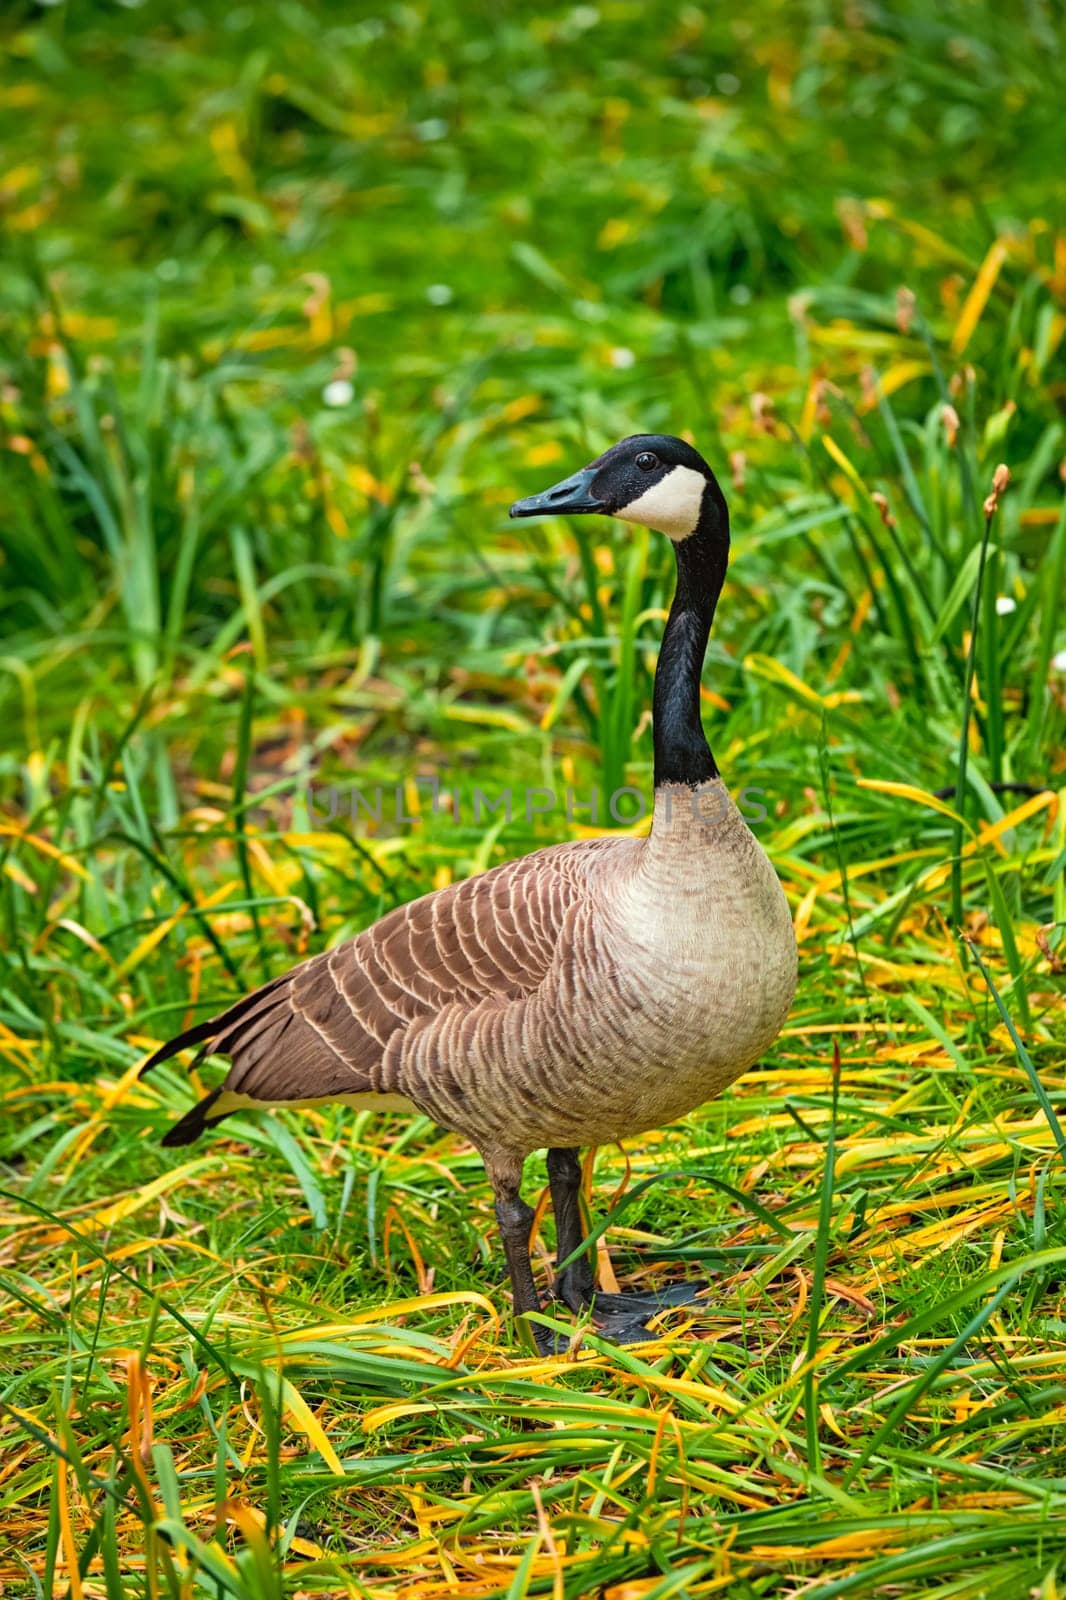 Canada goose on grass close up by dimol